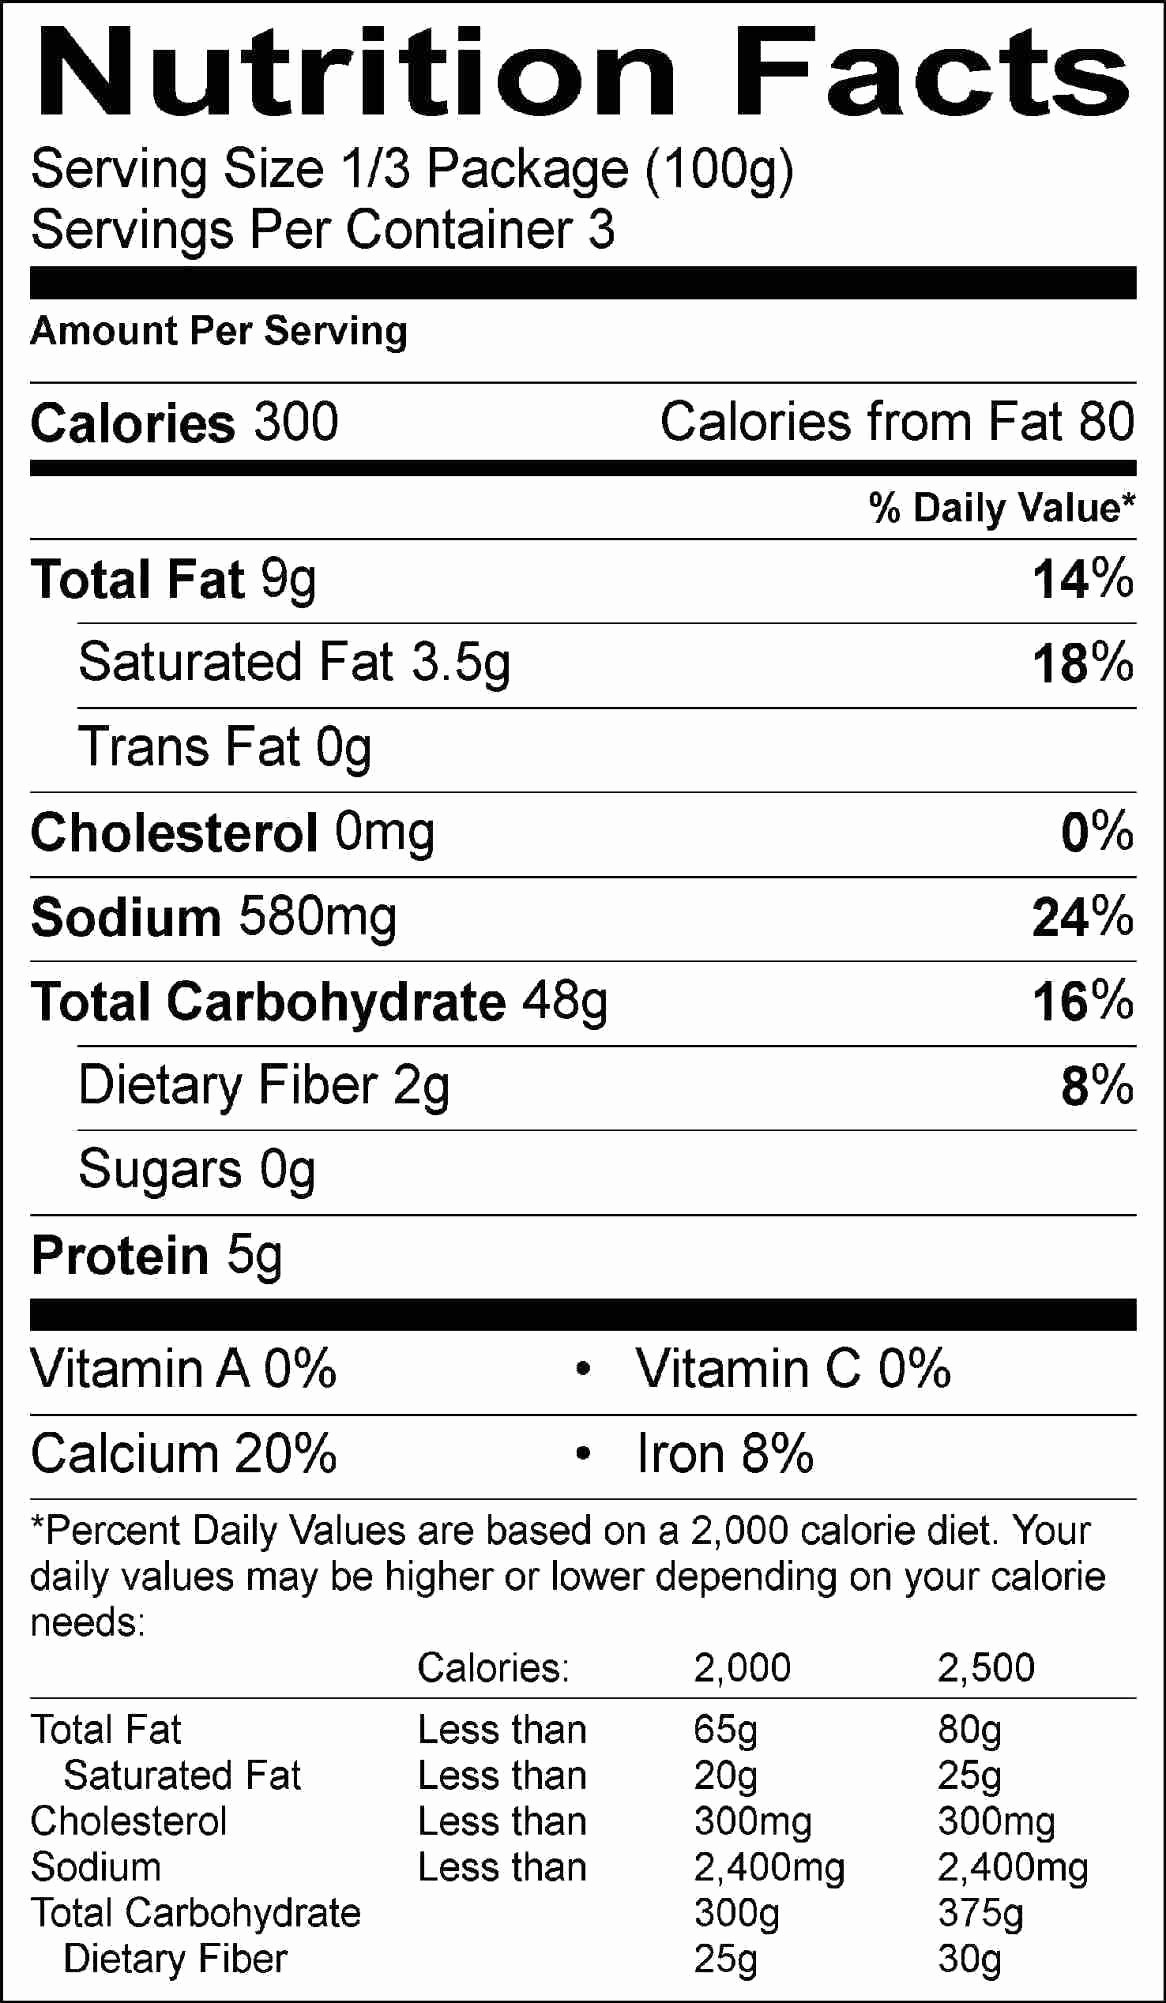 Nutrition Facts Template Excel Download Elegant Nutrition Facts Label Template Excel Nutrition Ftempo